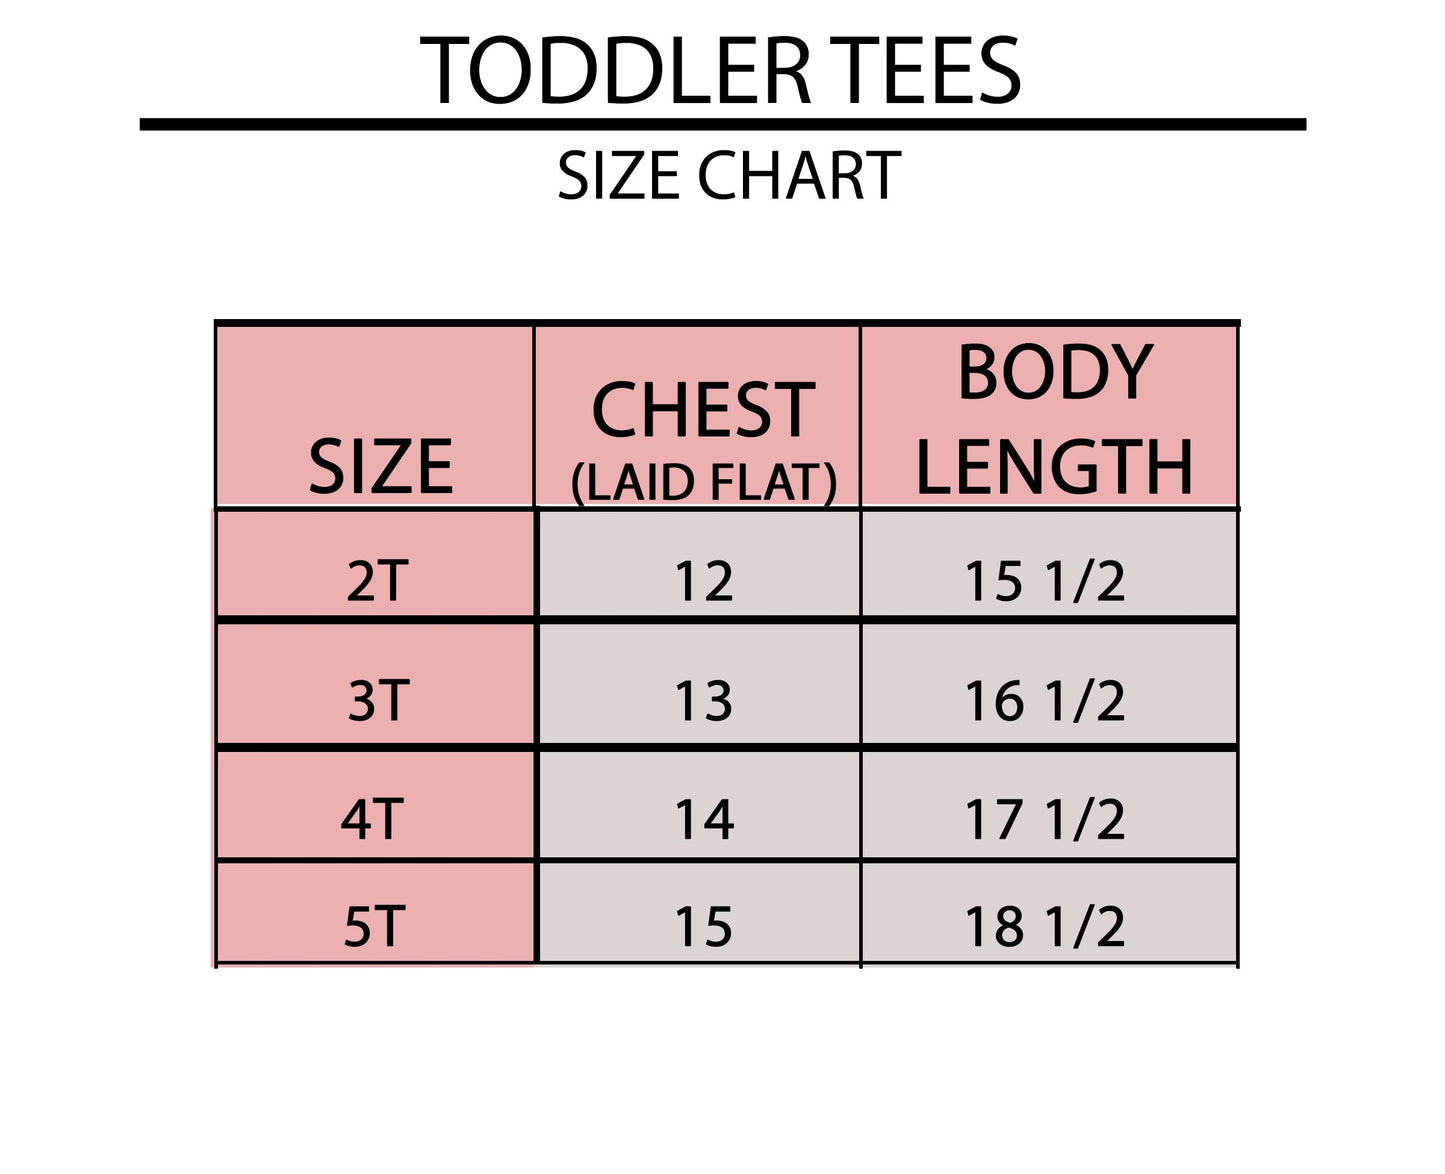 Retro Professional Patience Tester | Toddler Short Sleeve Crew Neck